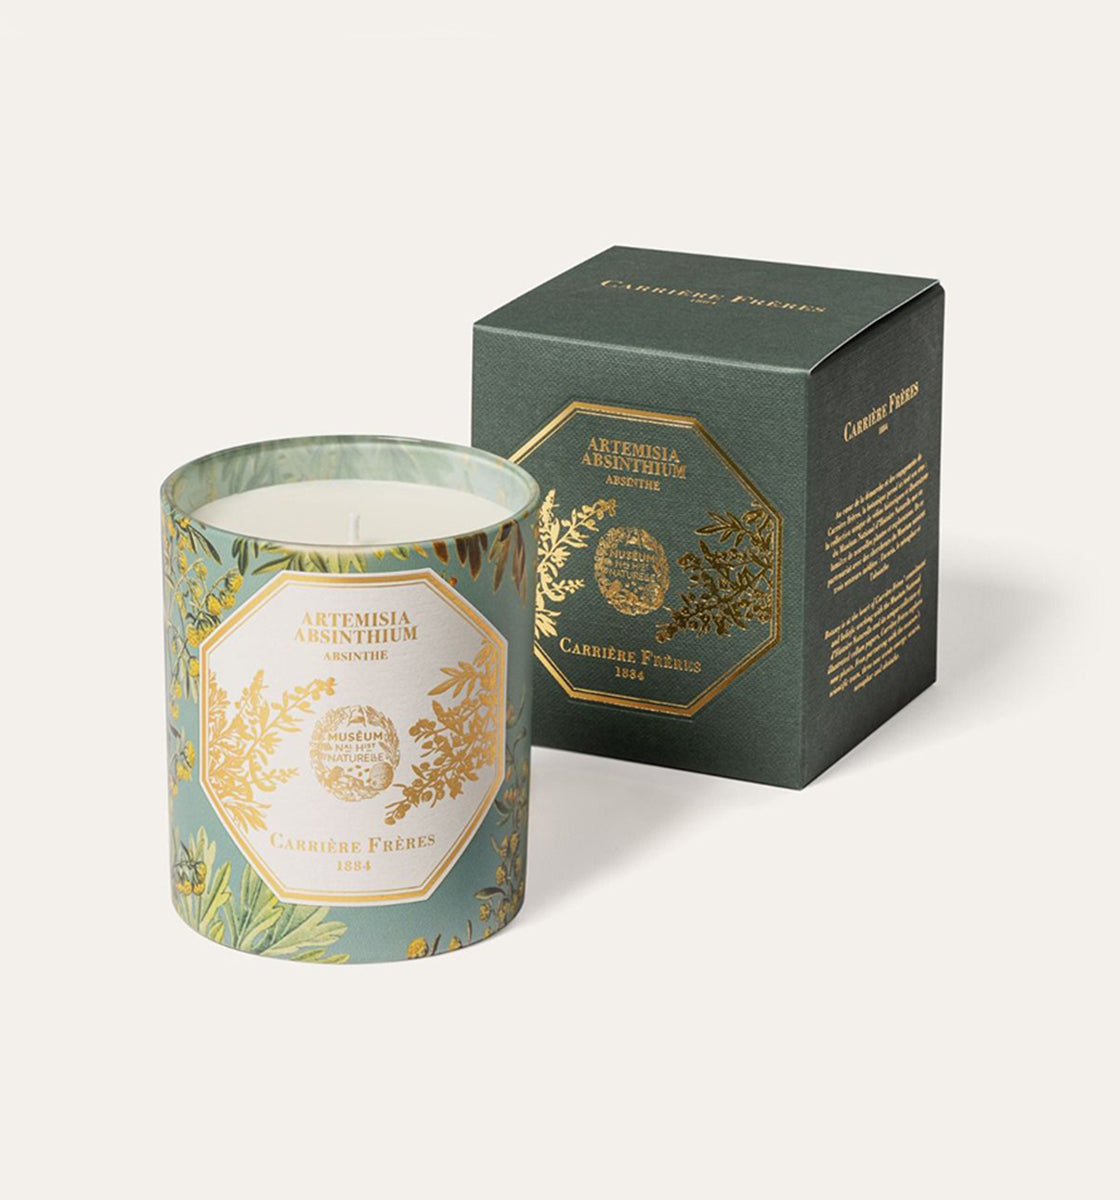 CARRIÈRE FRÈRES CANDLE are here! Make this holiday season a cozy one.